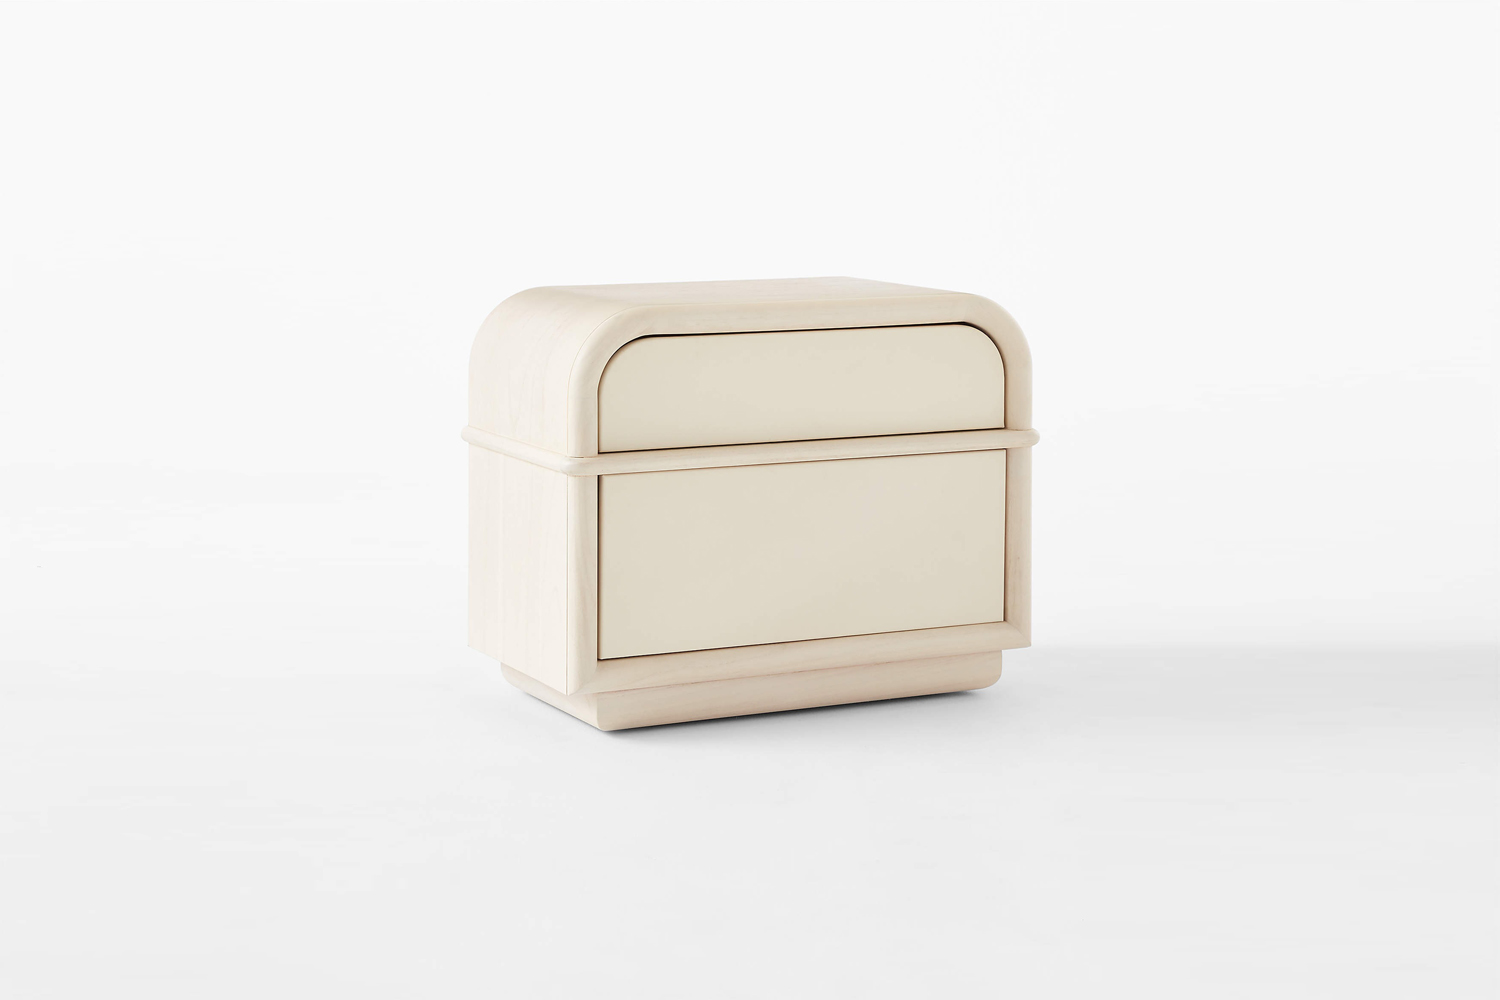 the lobos \2 drawer white wood nightstand is finished in ivory colored soft nap 25